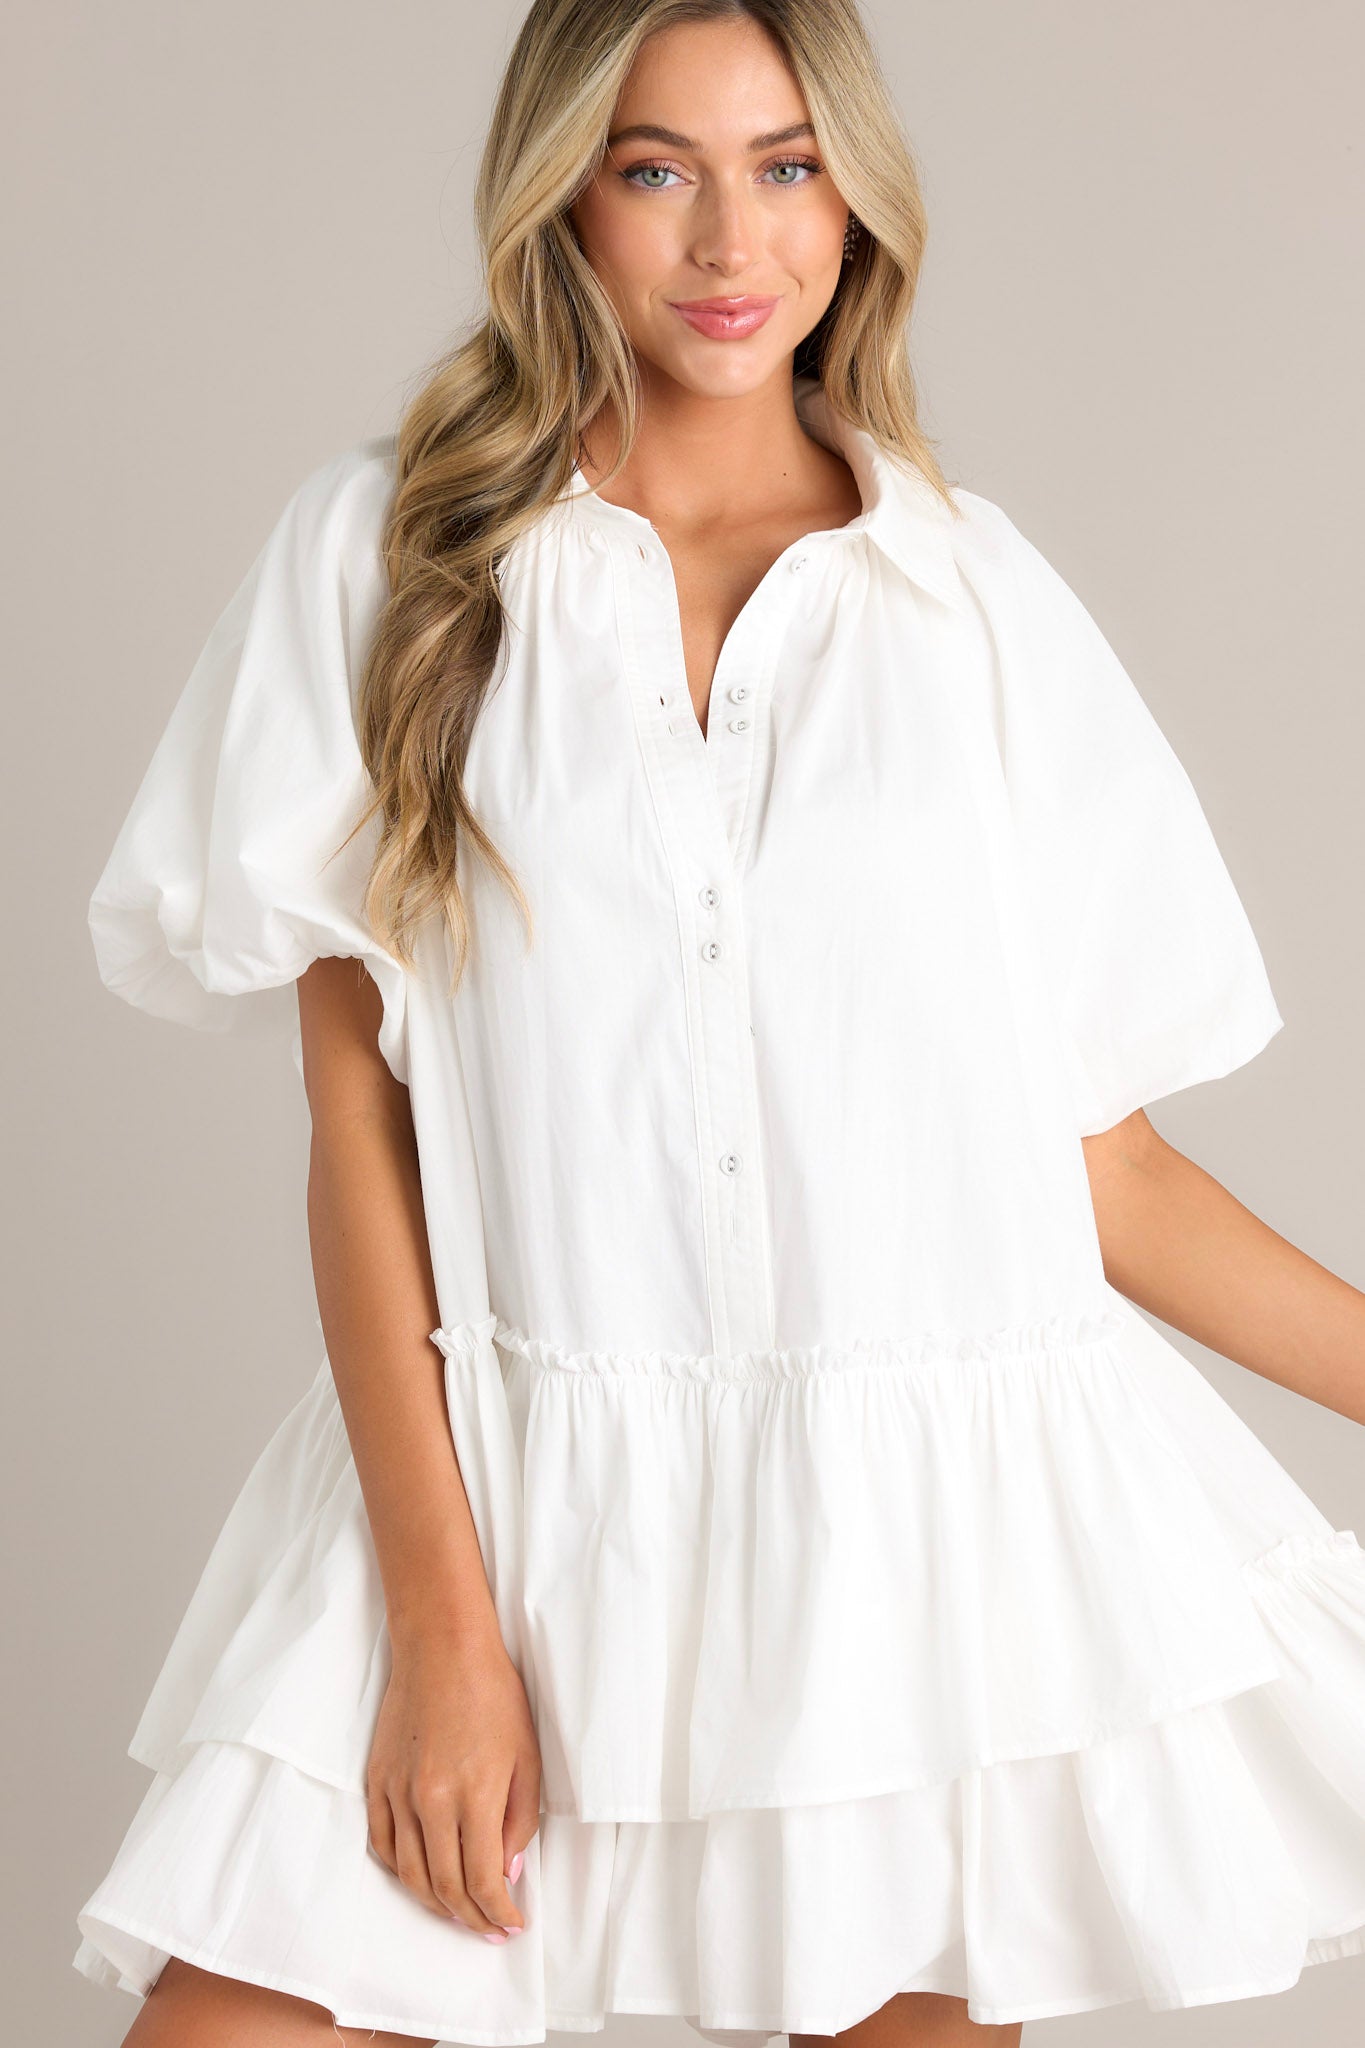 Close up front view of this White mini dress with a collared neckline, button-up front, and short puff sleeves. The dress has a tiered, ruffled skirt, giving it a playful and chic style.